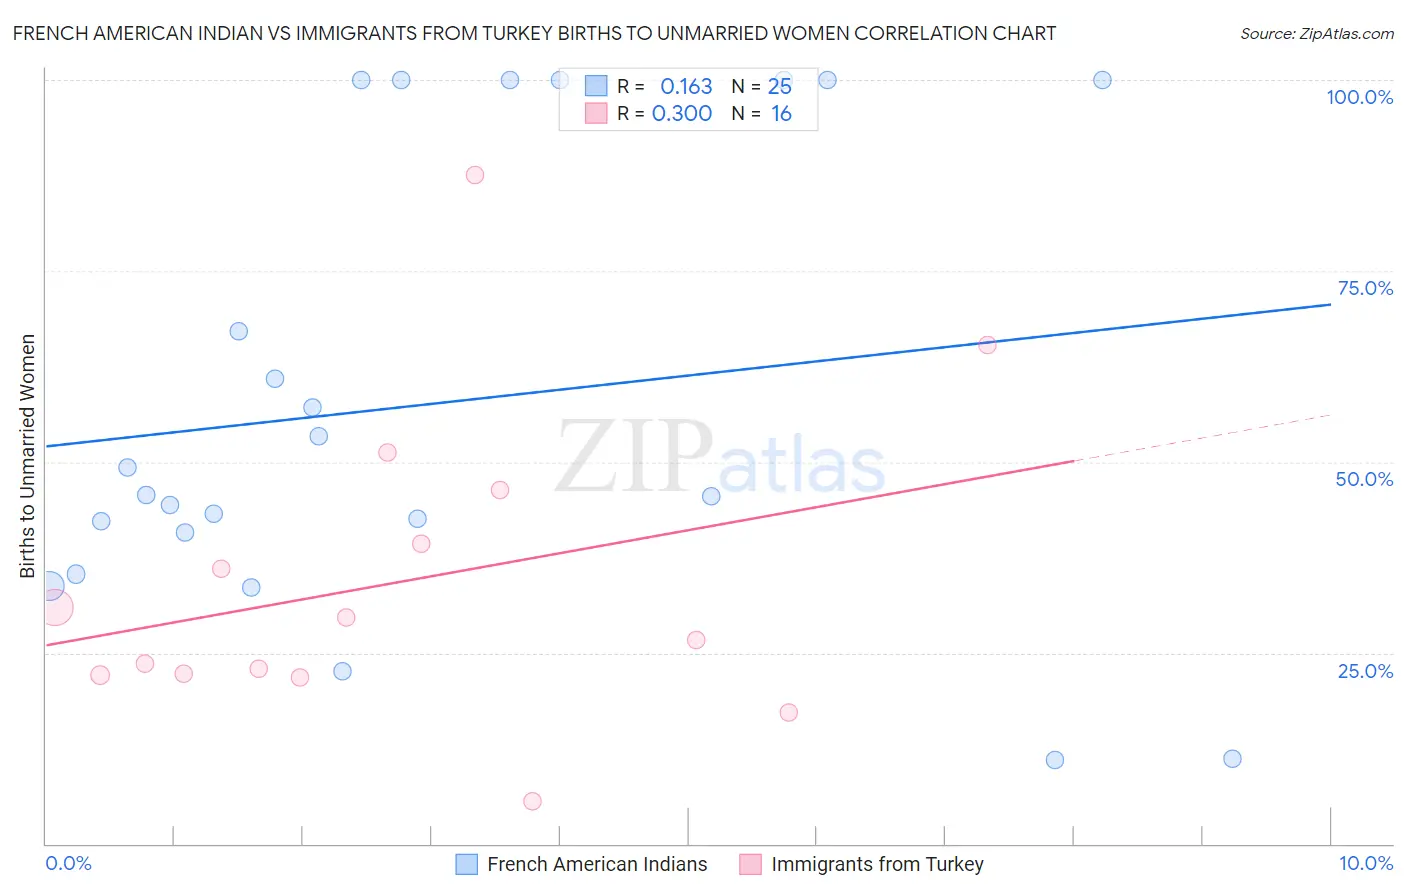 French American Indian vs Immigrants from Turkey Births to Unmarried Women